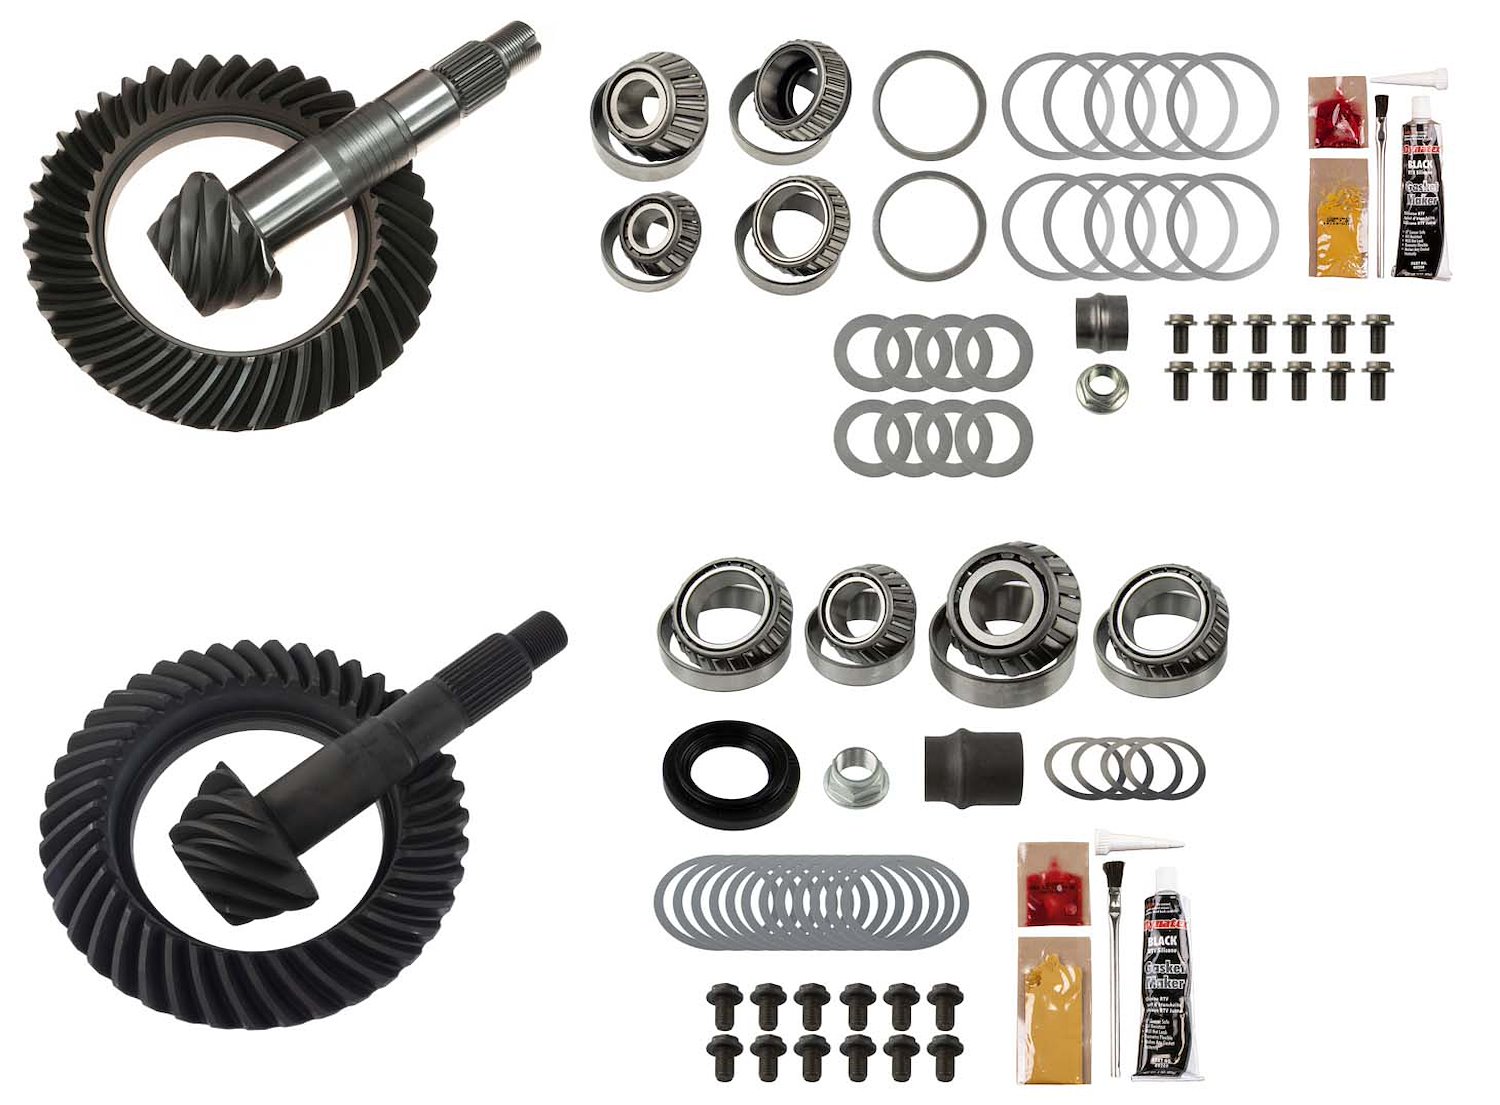 Complete Front and Rear Ring and Pinion Kit 2005-2015 Toyota Tacoma - 4.88 Ratio